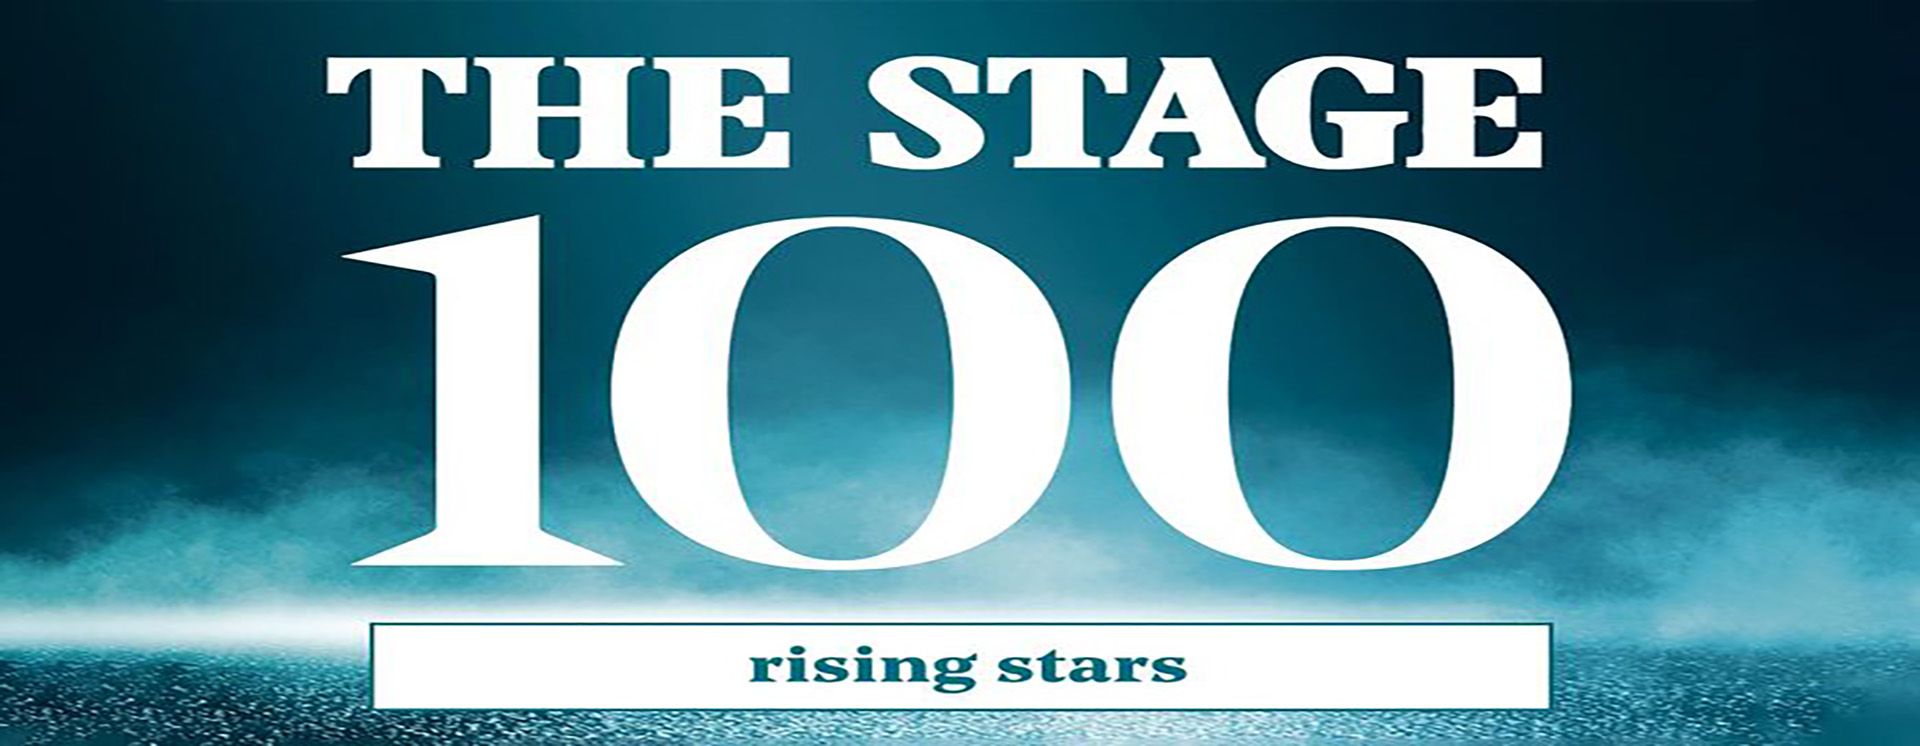 The words The Stage 100 rising stars